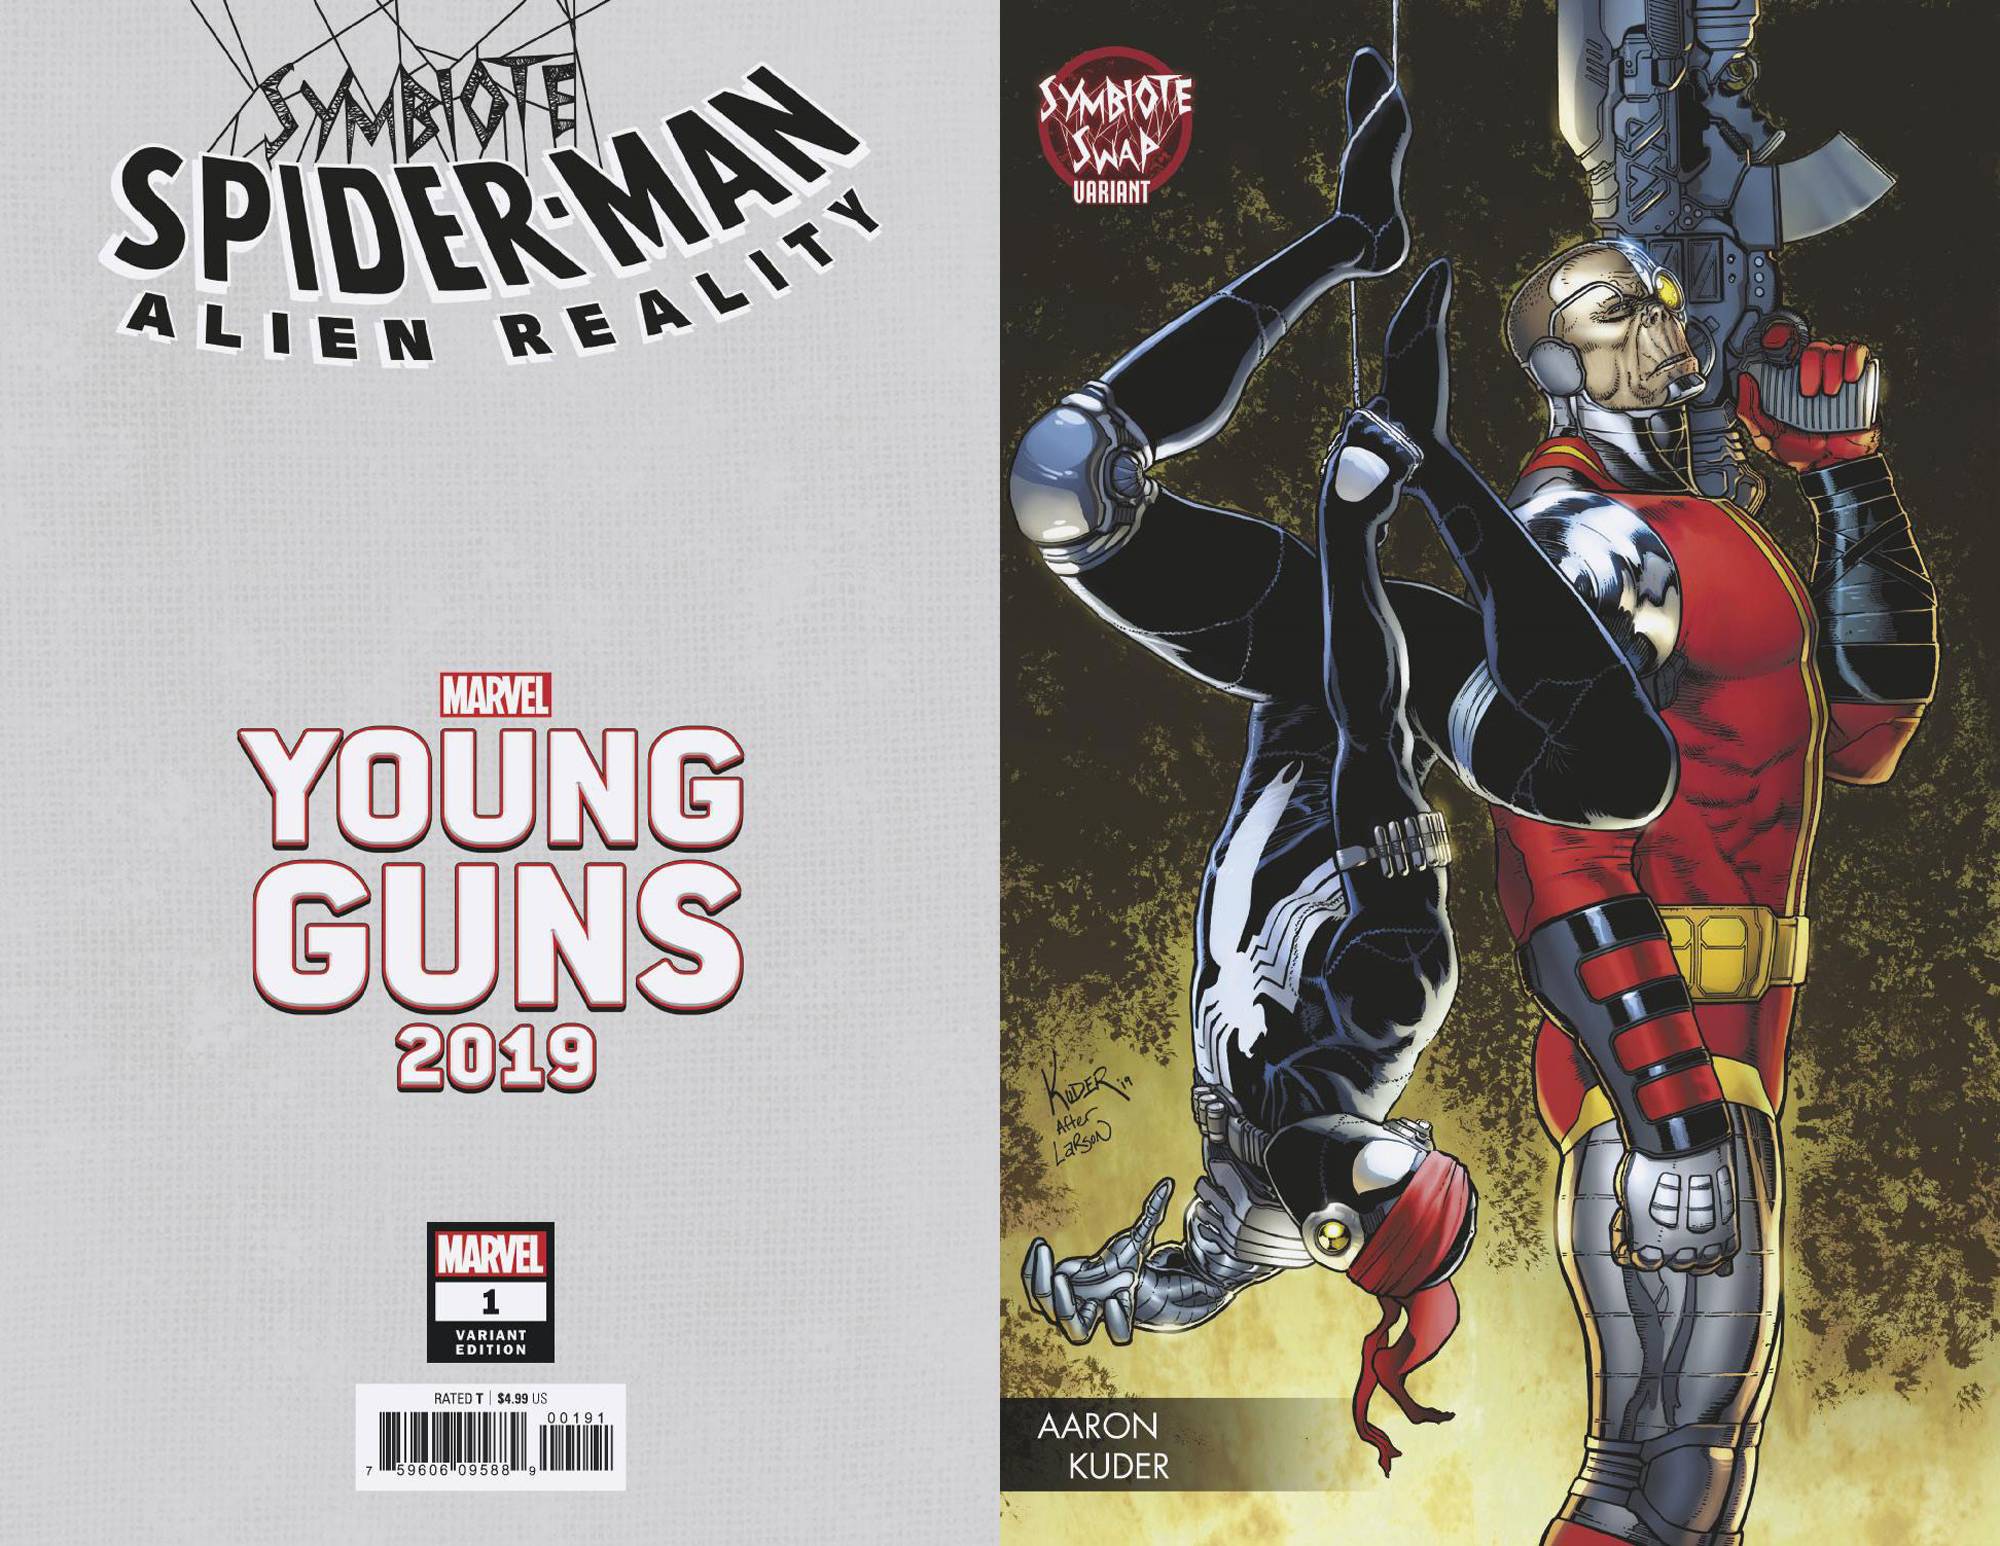 SYMBIOTE SPIDER-MAN ALIEN REALITY #1 (OF 5) KUDER YOUNG GUNS 12/11/19 FOC 11/11/19